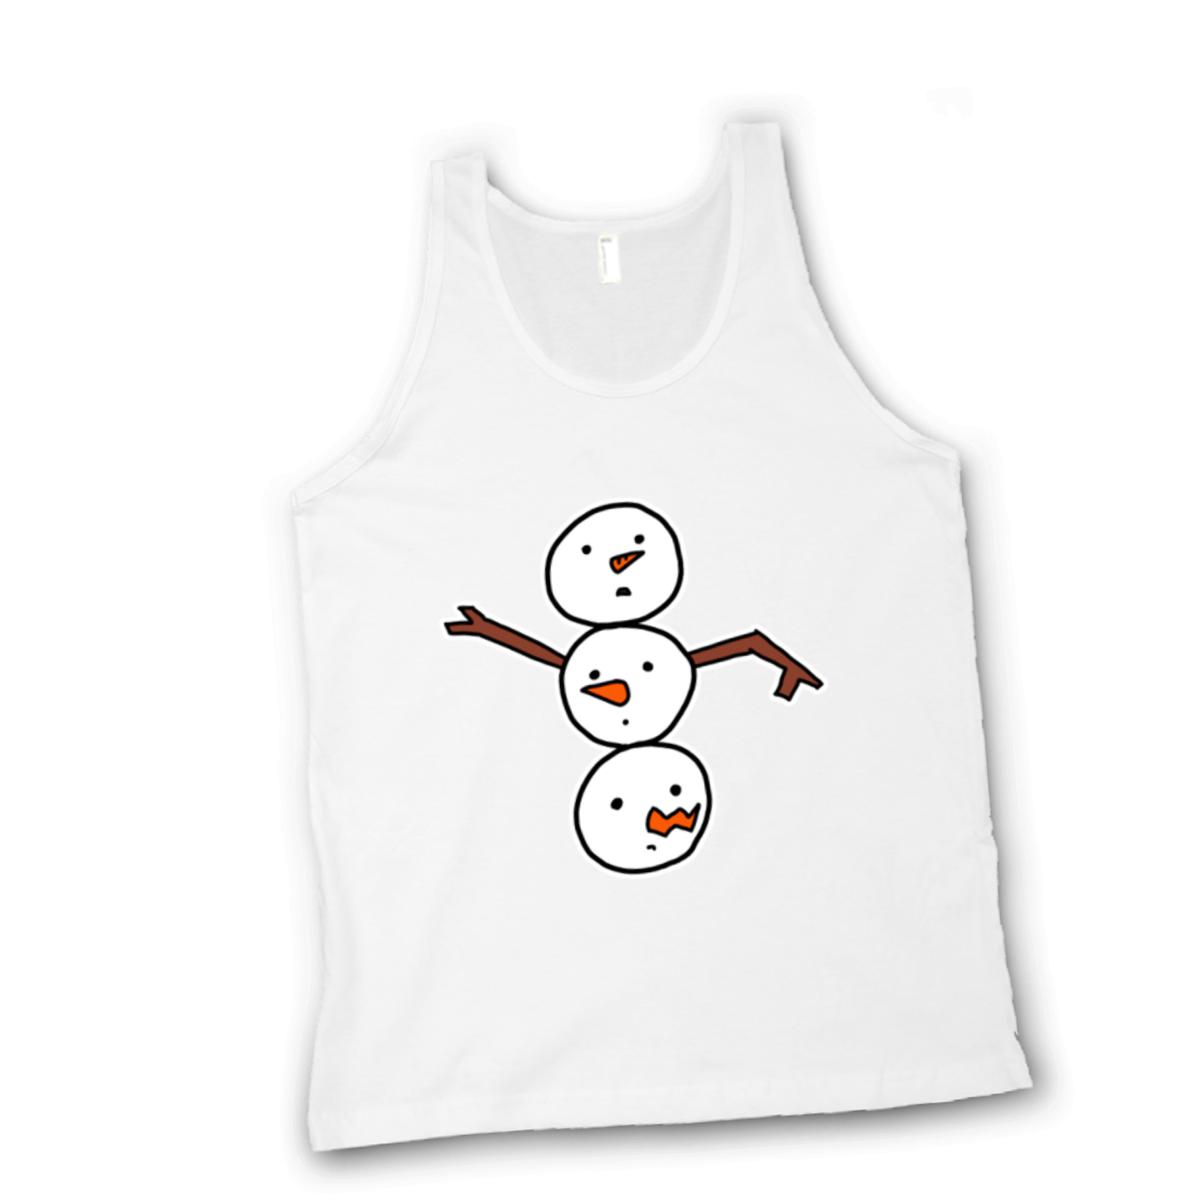 Snowman All Heads Unisex Tank Top Double Extra Large white